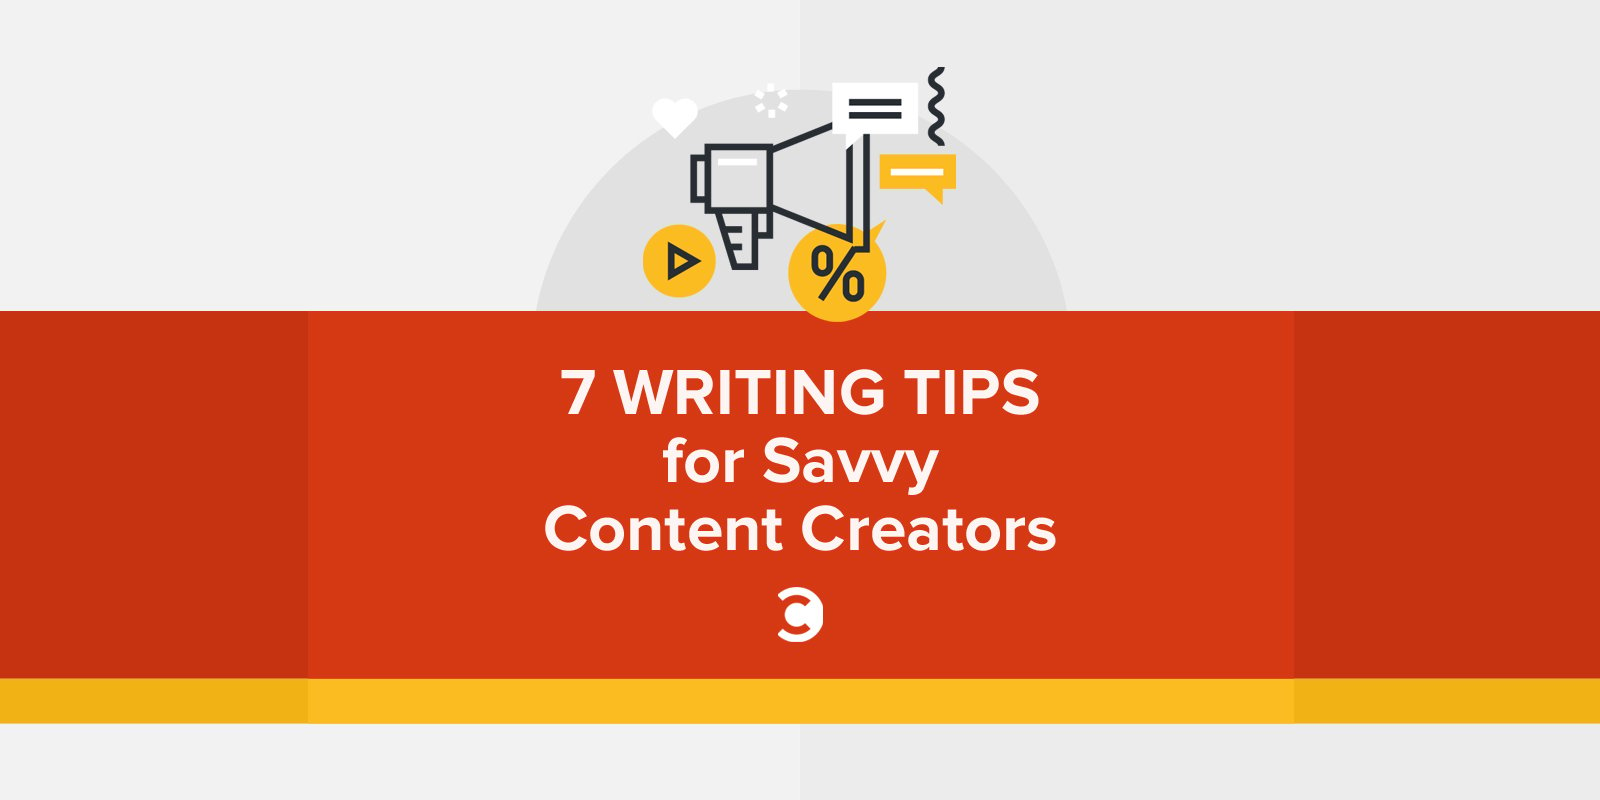 7 Writing Tips for Savvy Content Creators